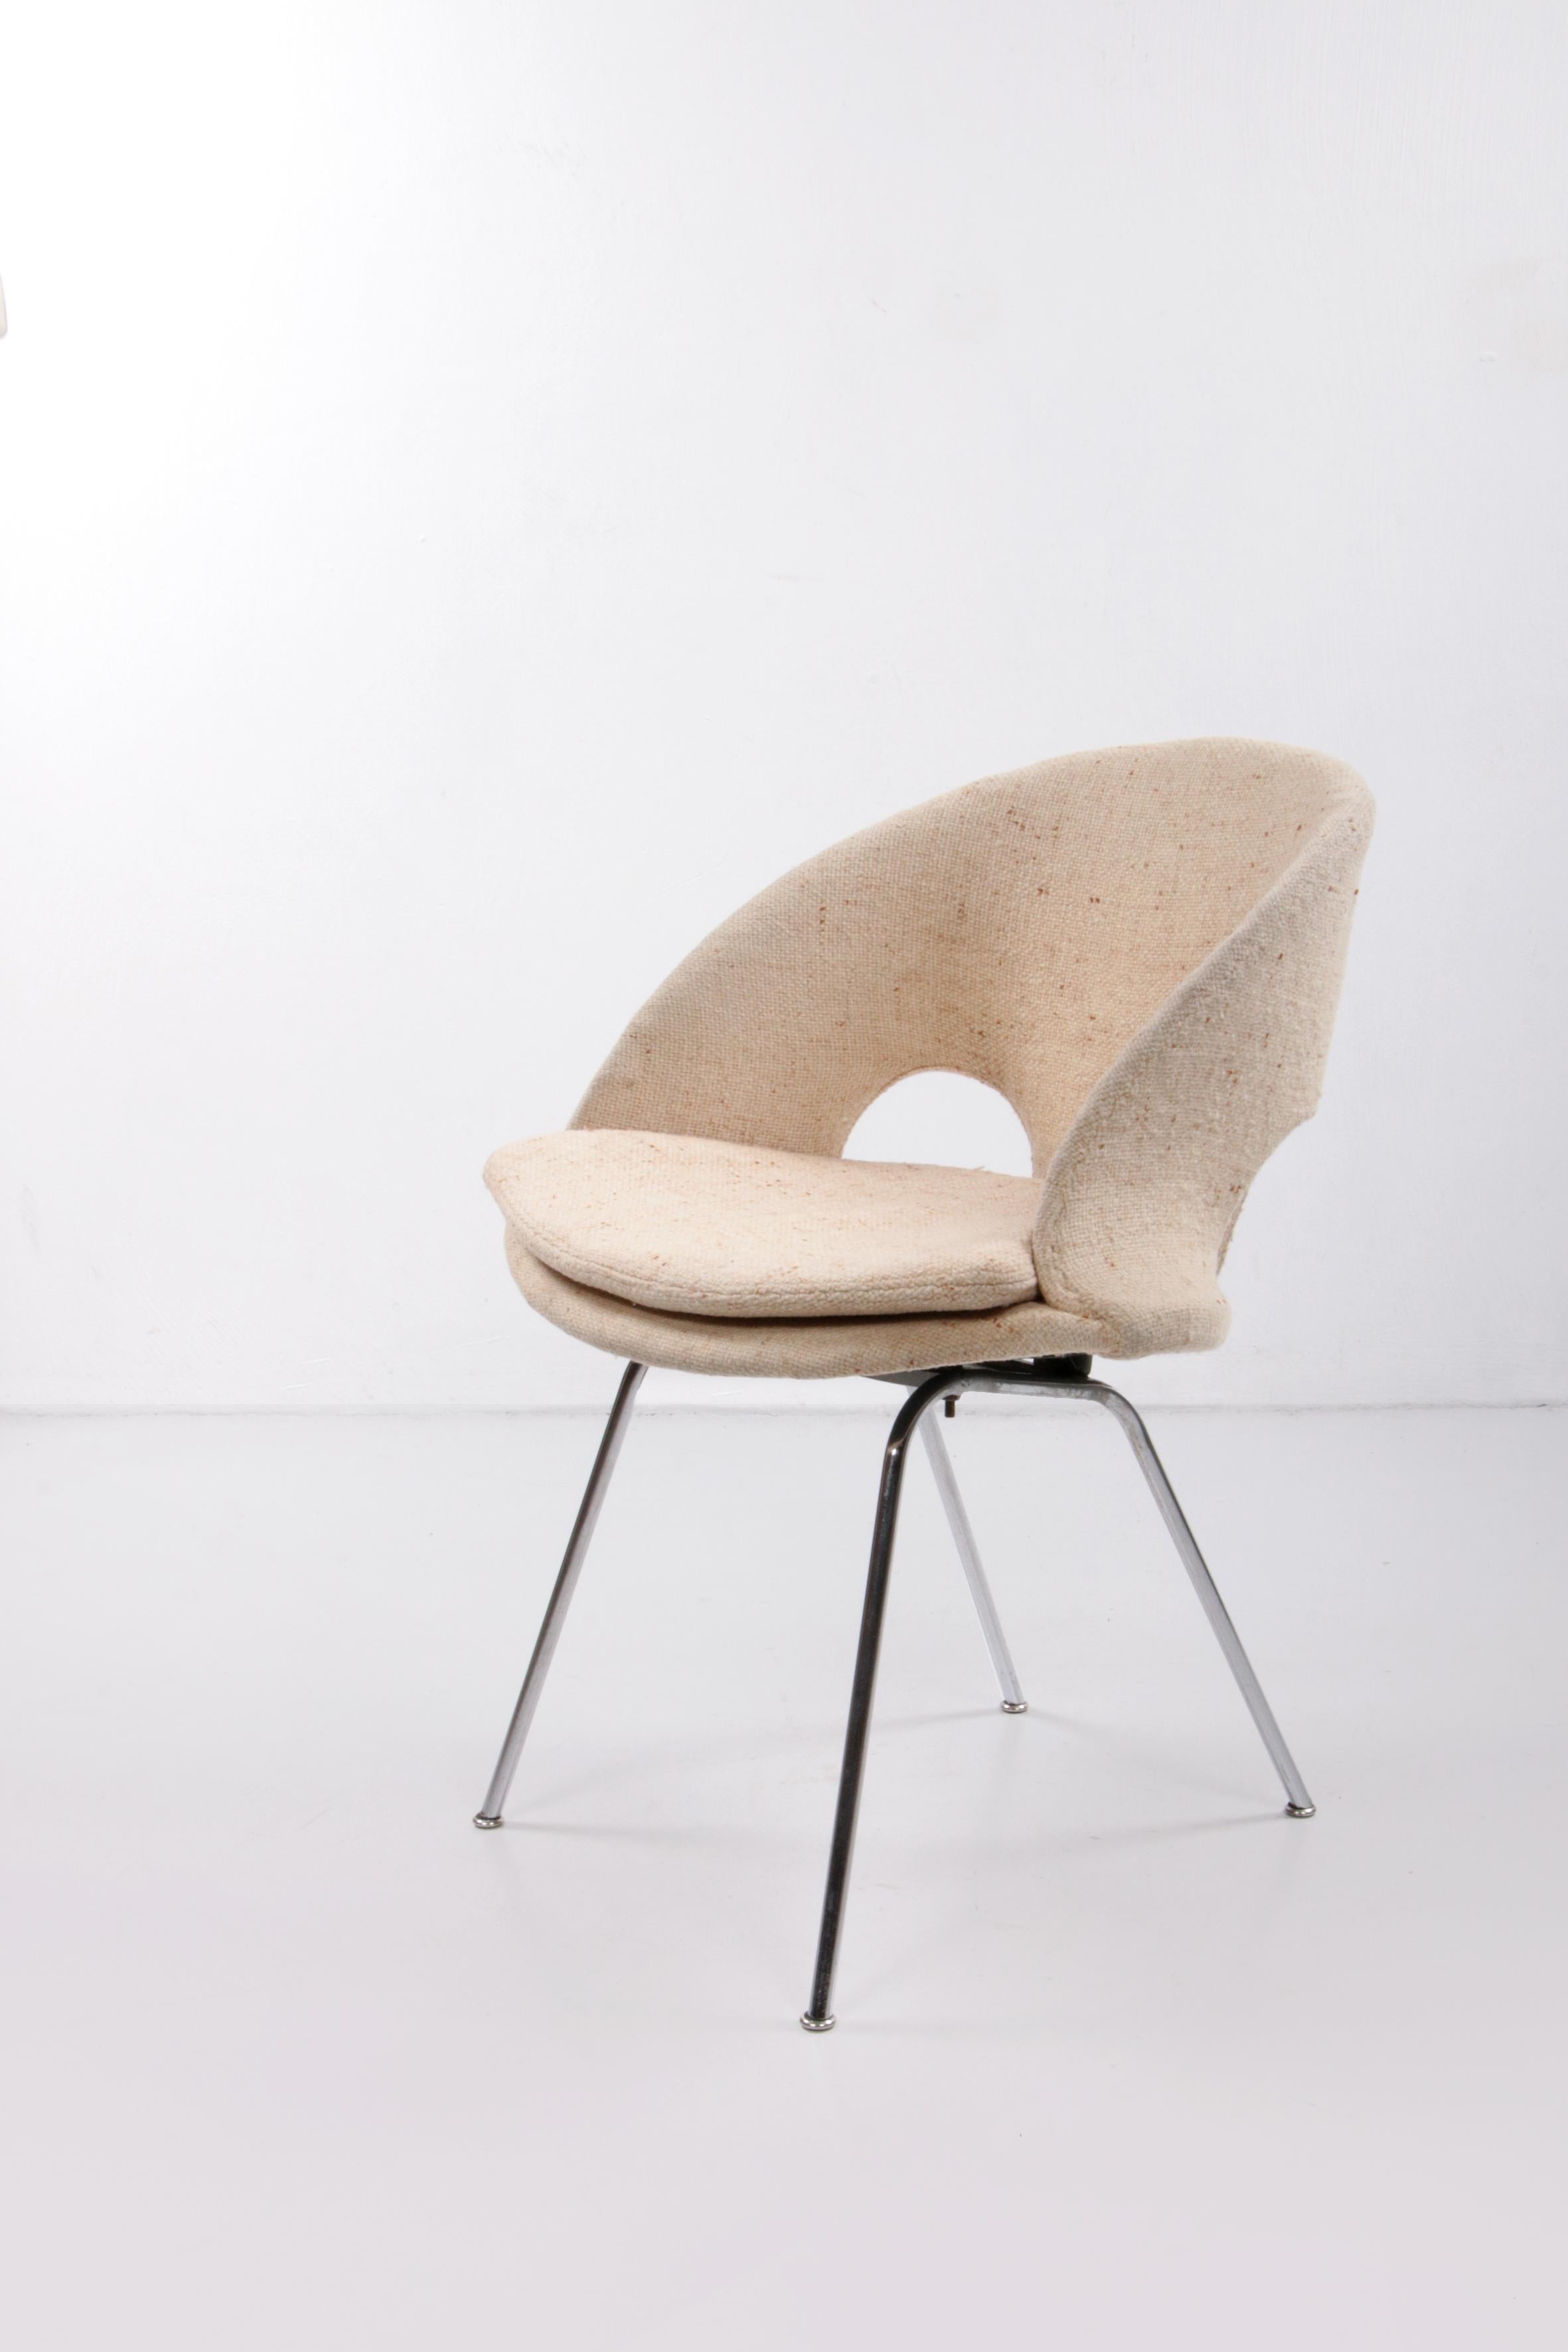 Knoll Dining Chair Model 350, Germany, 1950 1